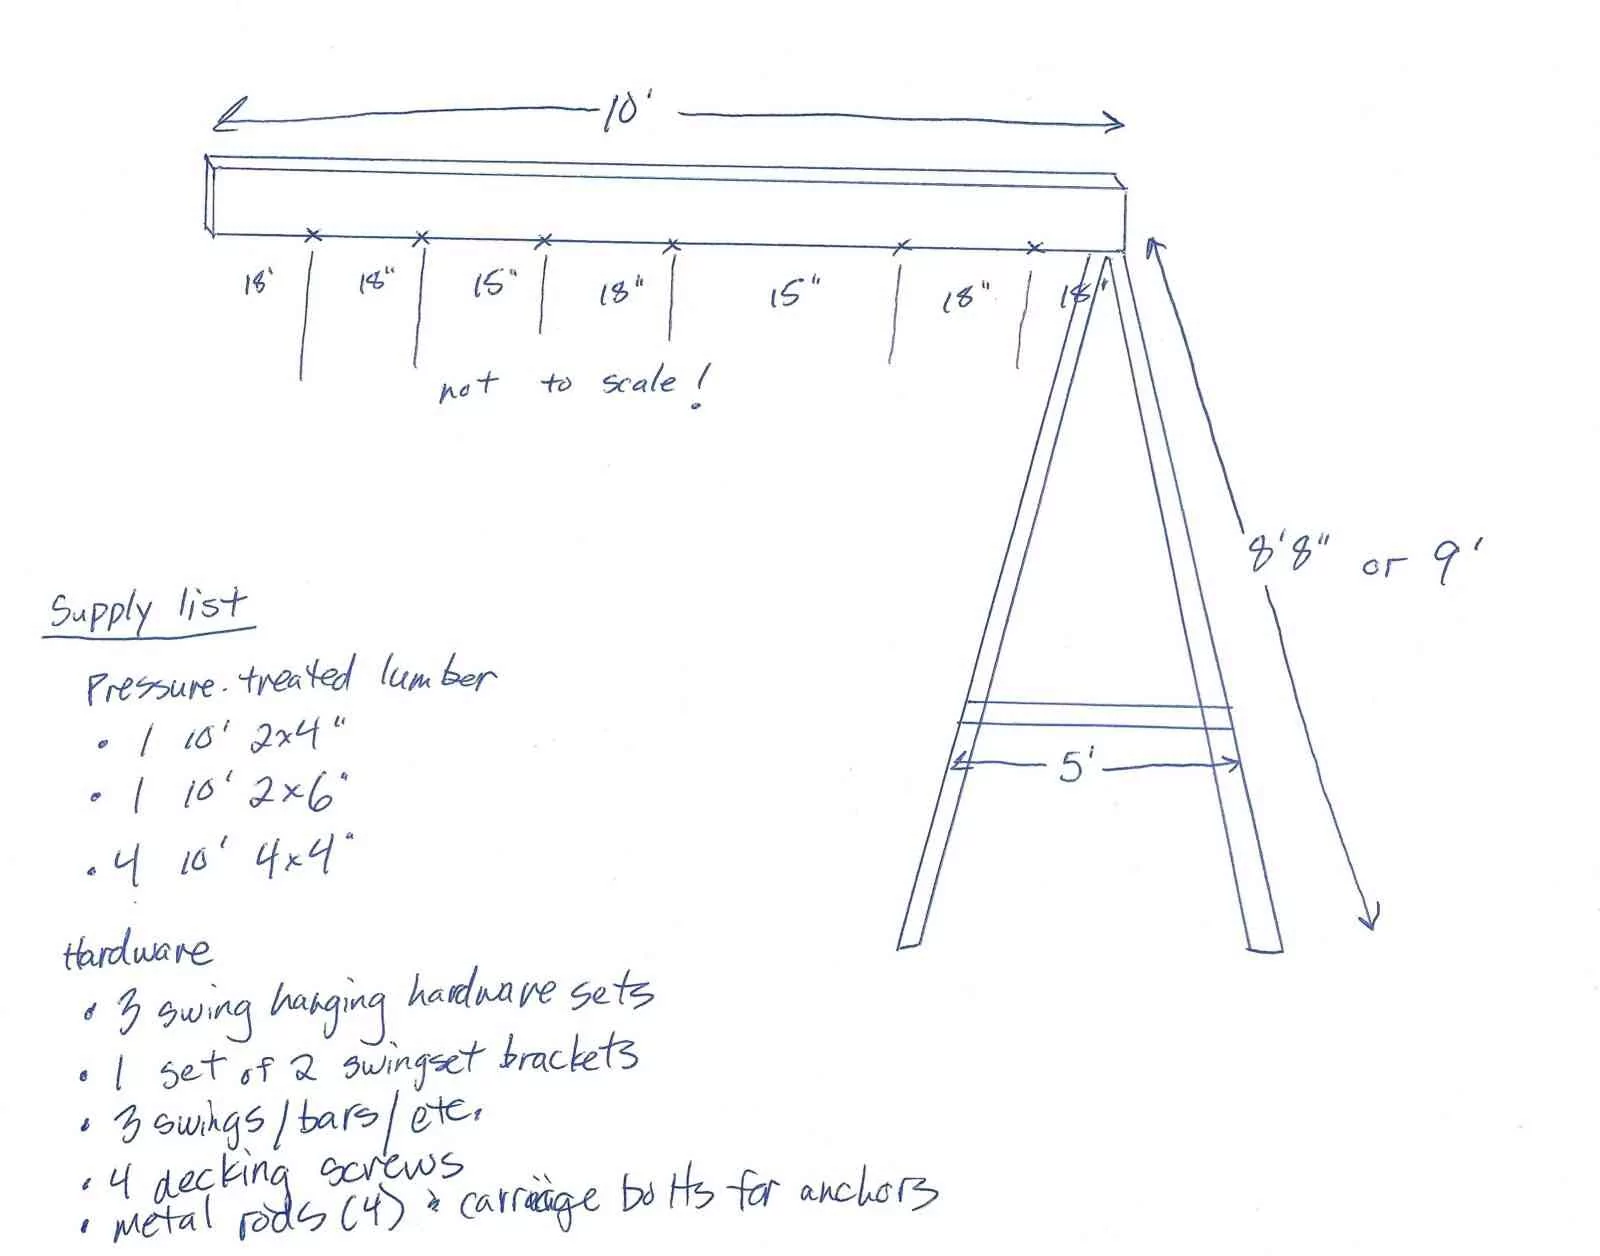 Free Diy Wooden Swing Set Plans The Frugal South